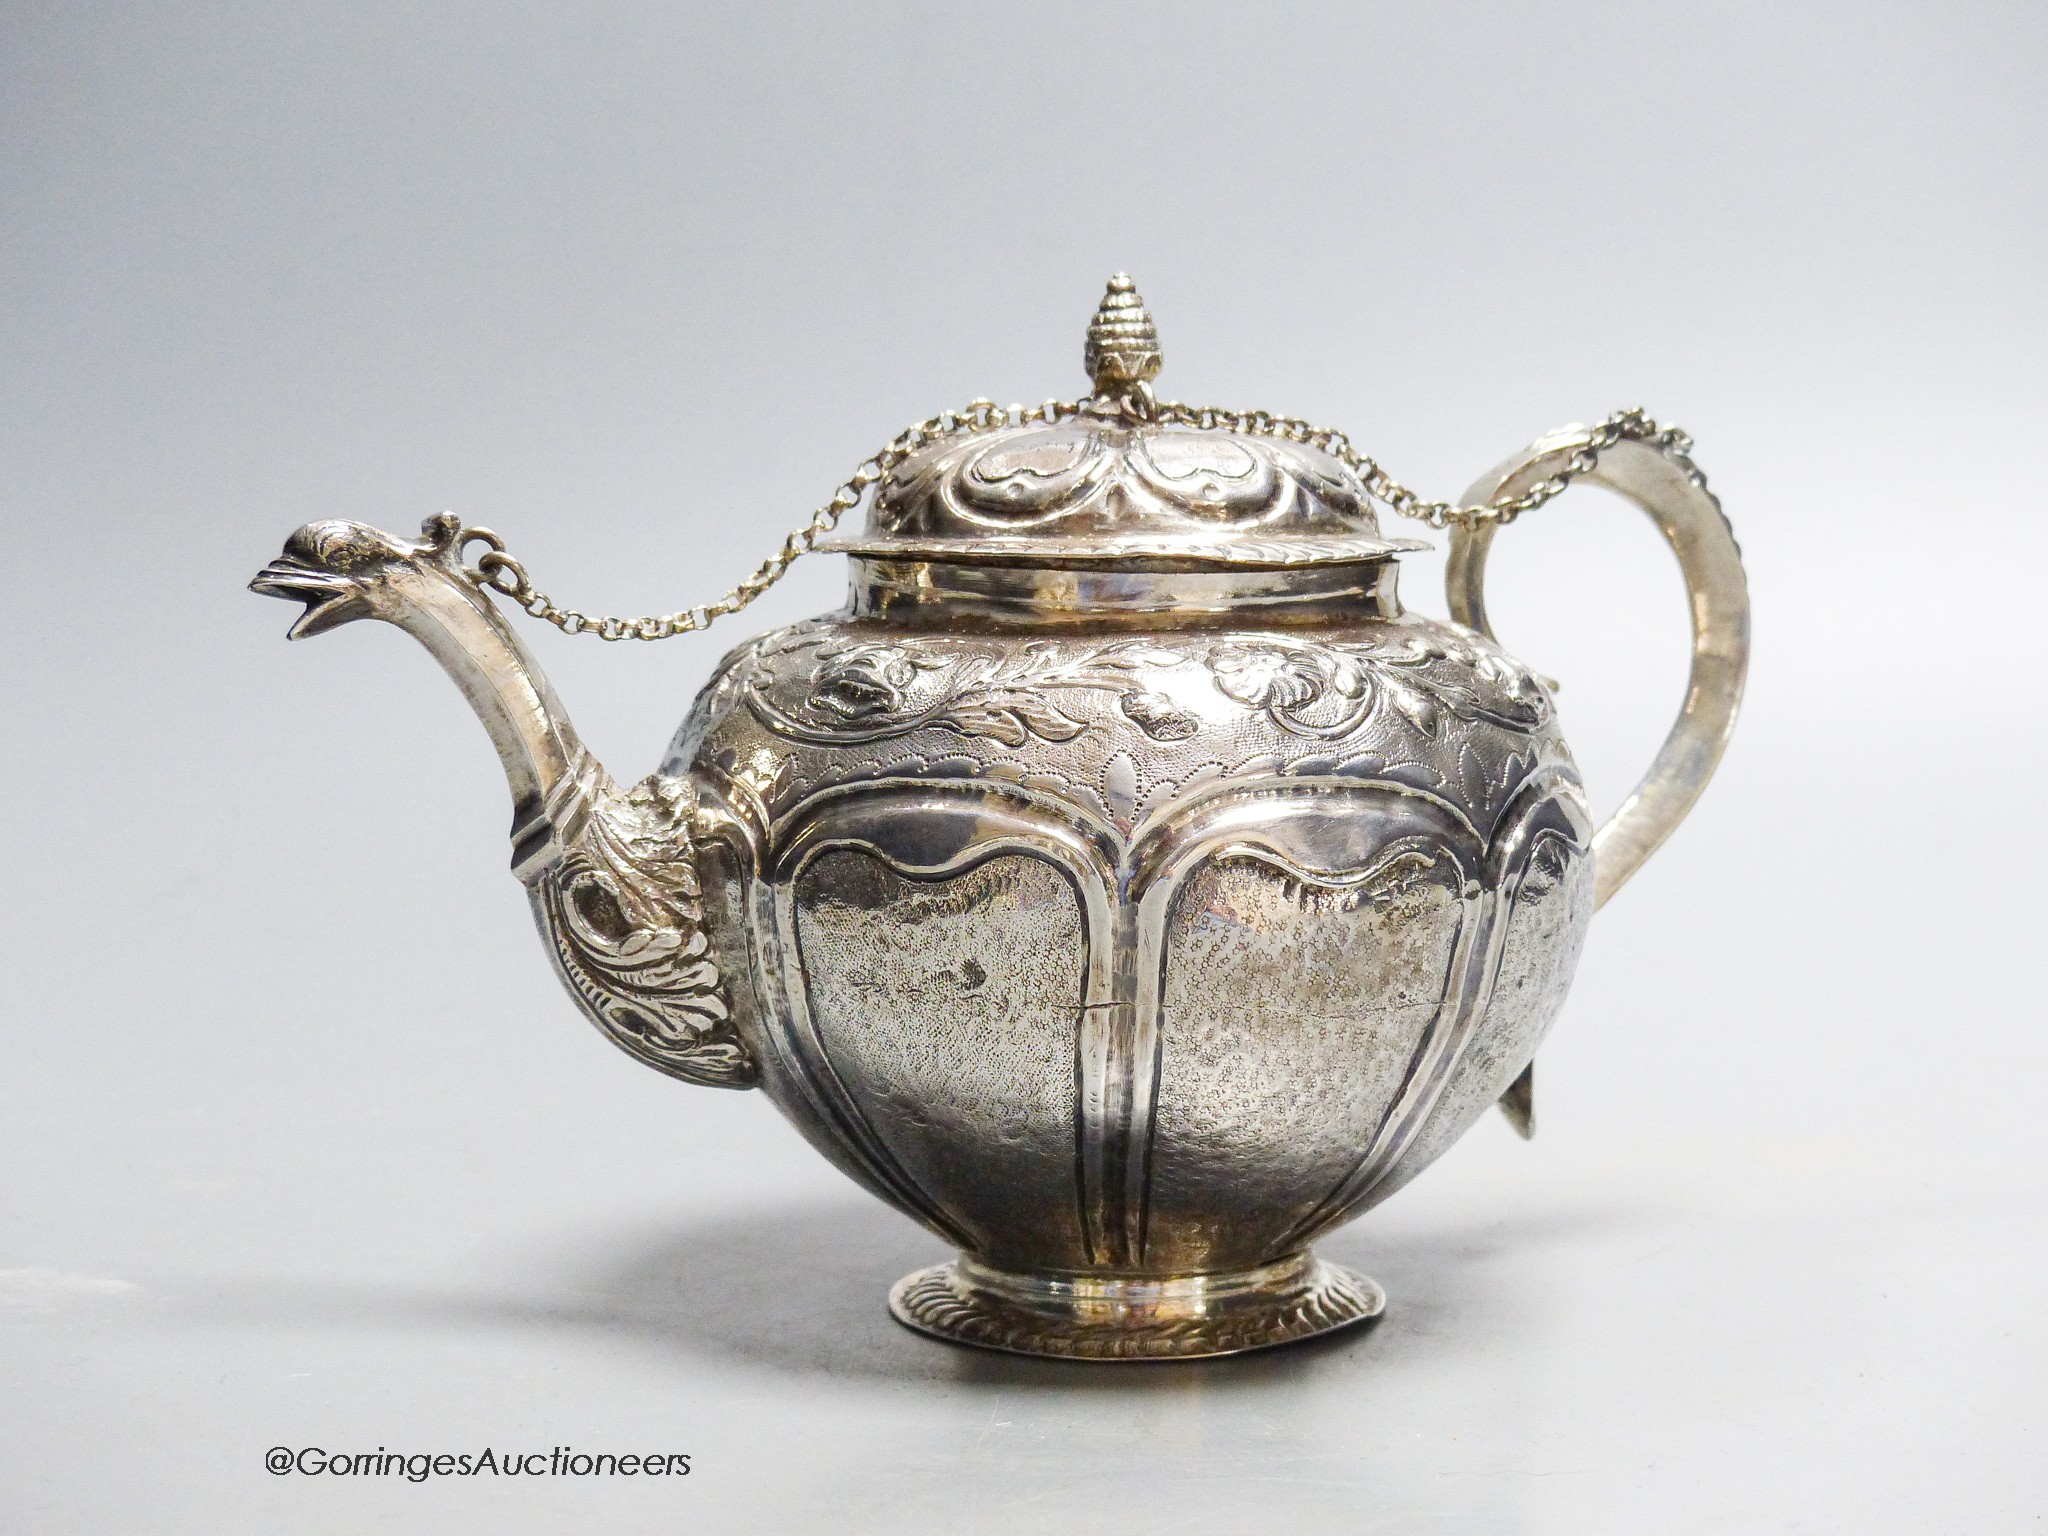 A late 18th/early 19th century Dutch? embossed white metal teapot, 13.5cm, gross 11.5oz